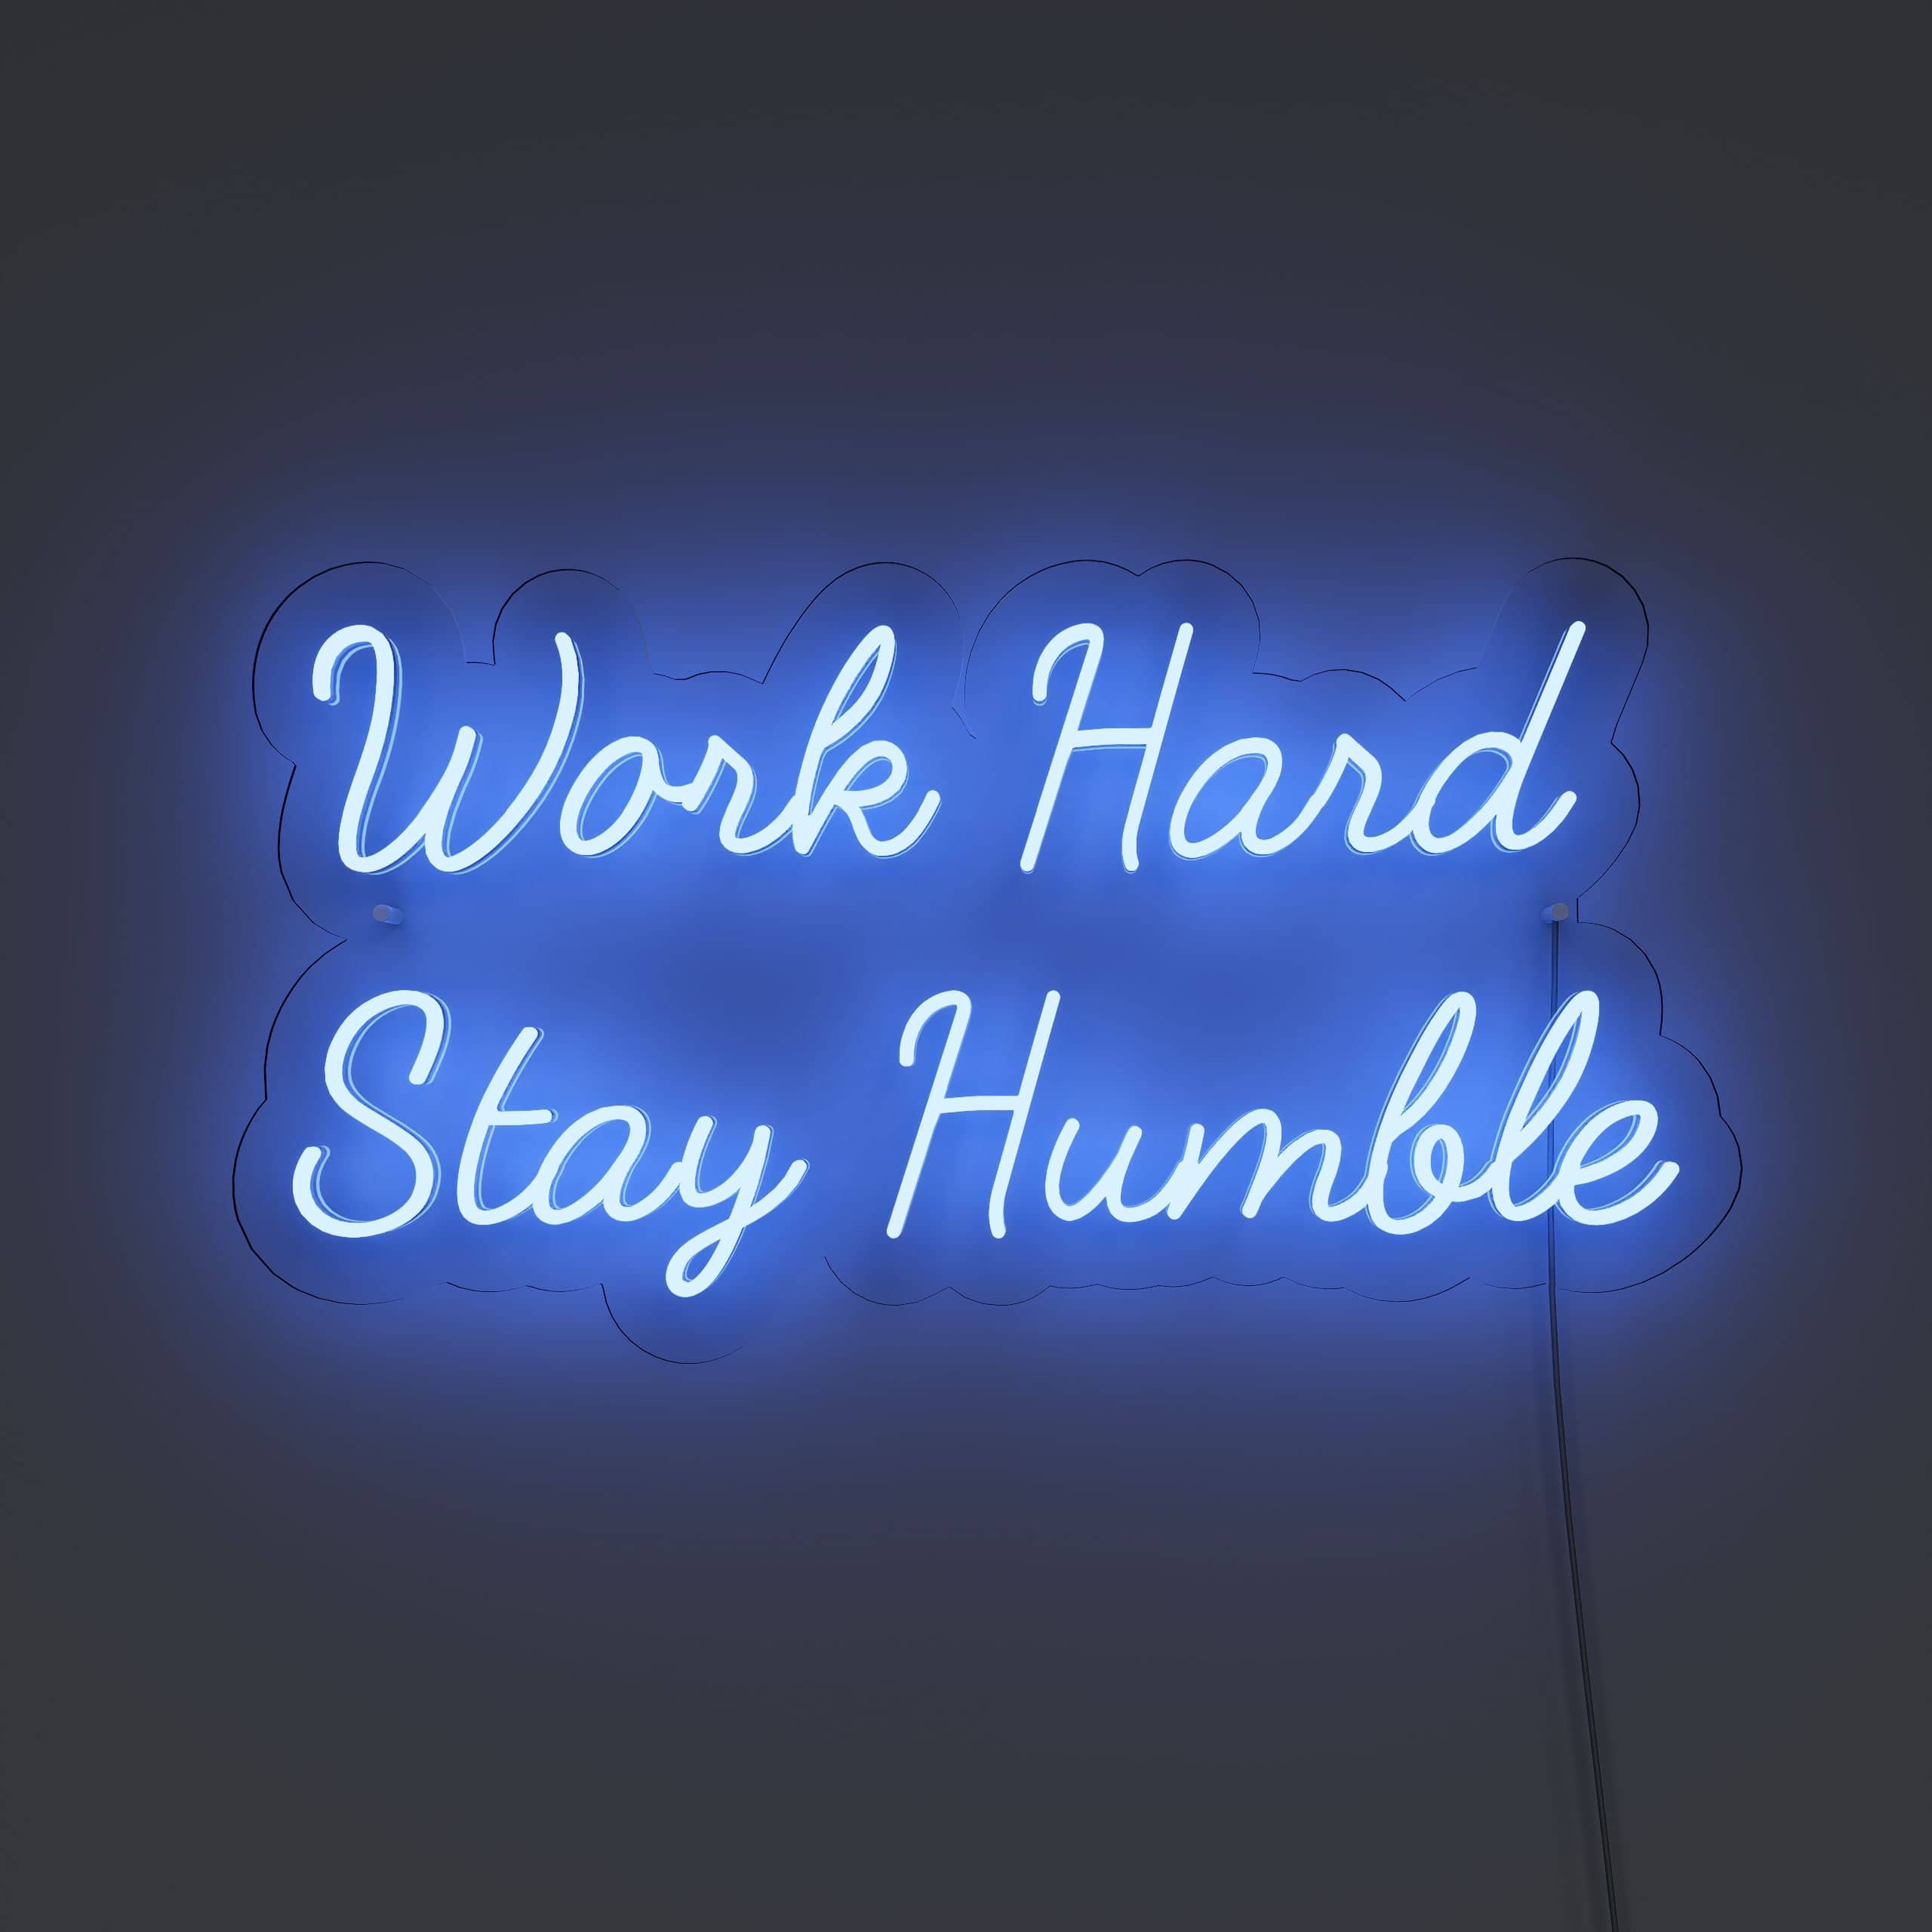 grind-with-diligence,-remain-grounded-neon-sign-lite